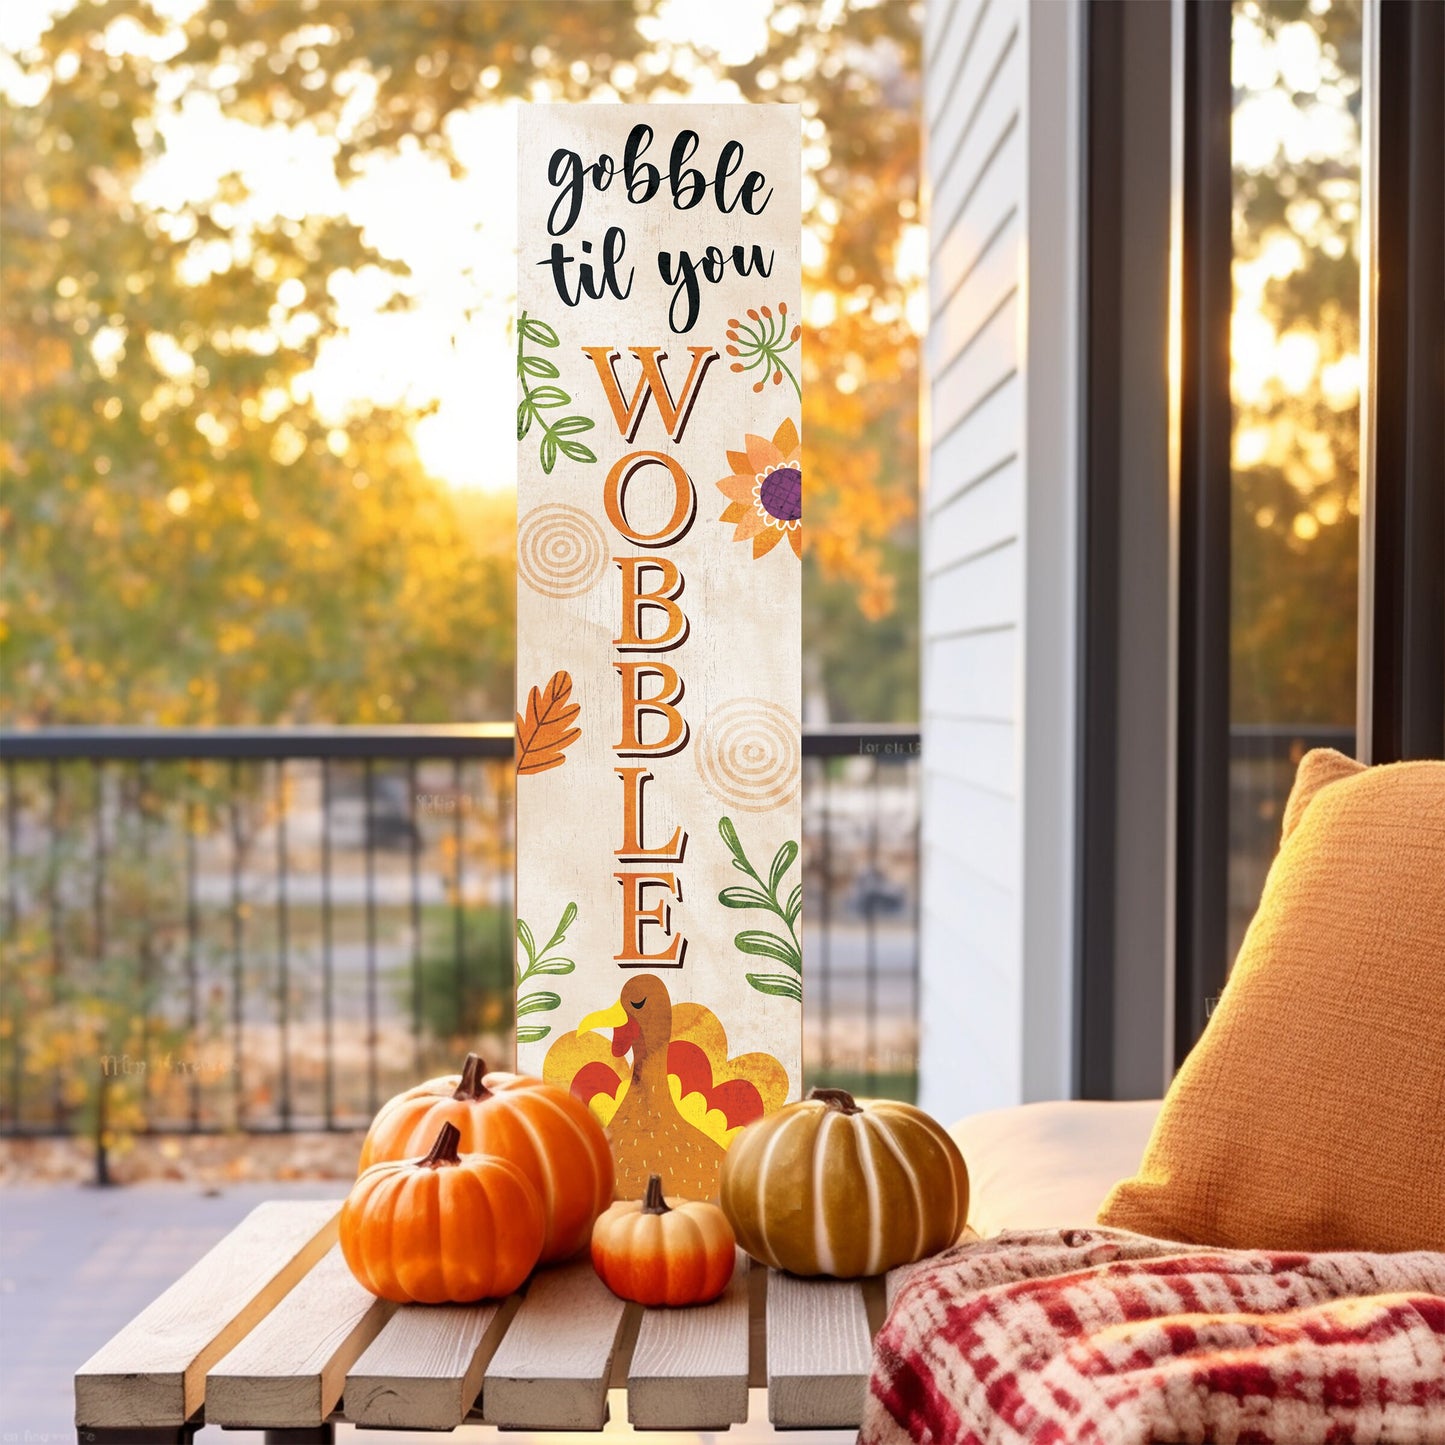 36in "Gobble Til You Wobble" Fall Porch Sign - Rustic Harvest Decor for Front Door Display during Thanksgiving Celebrations